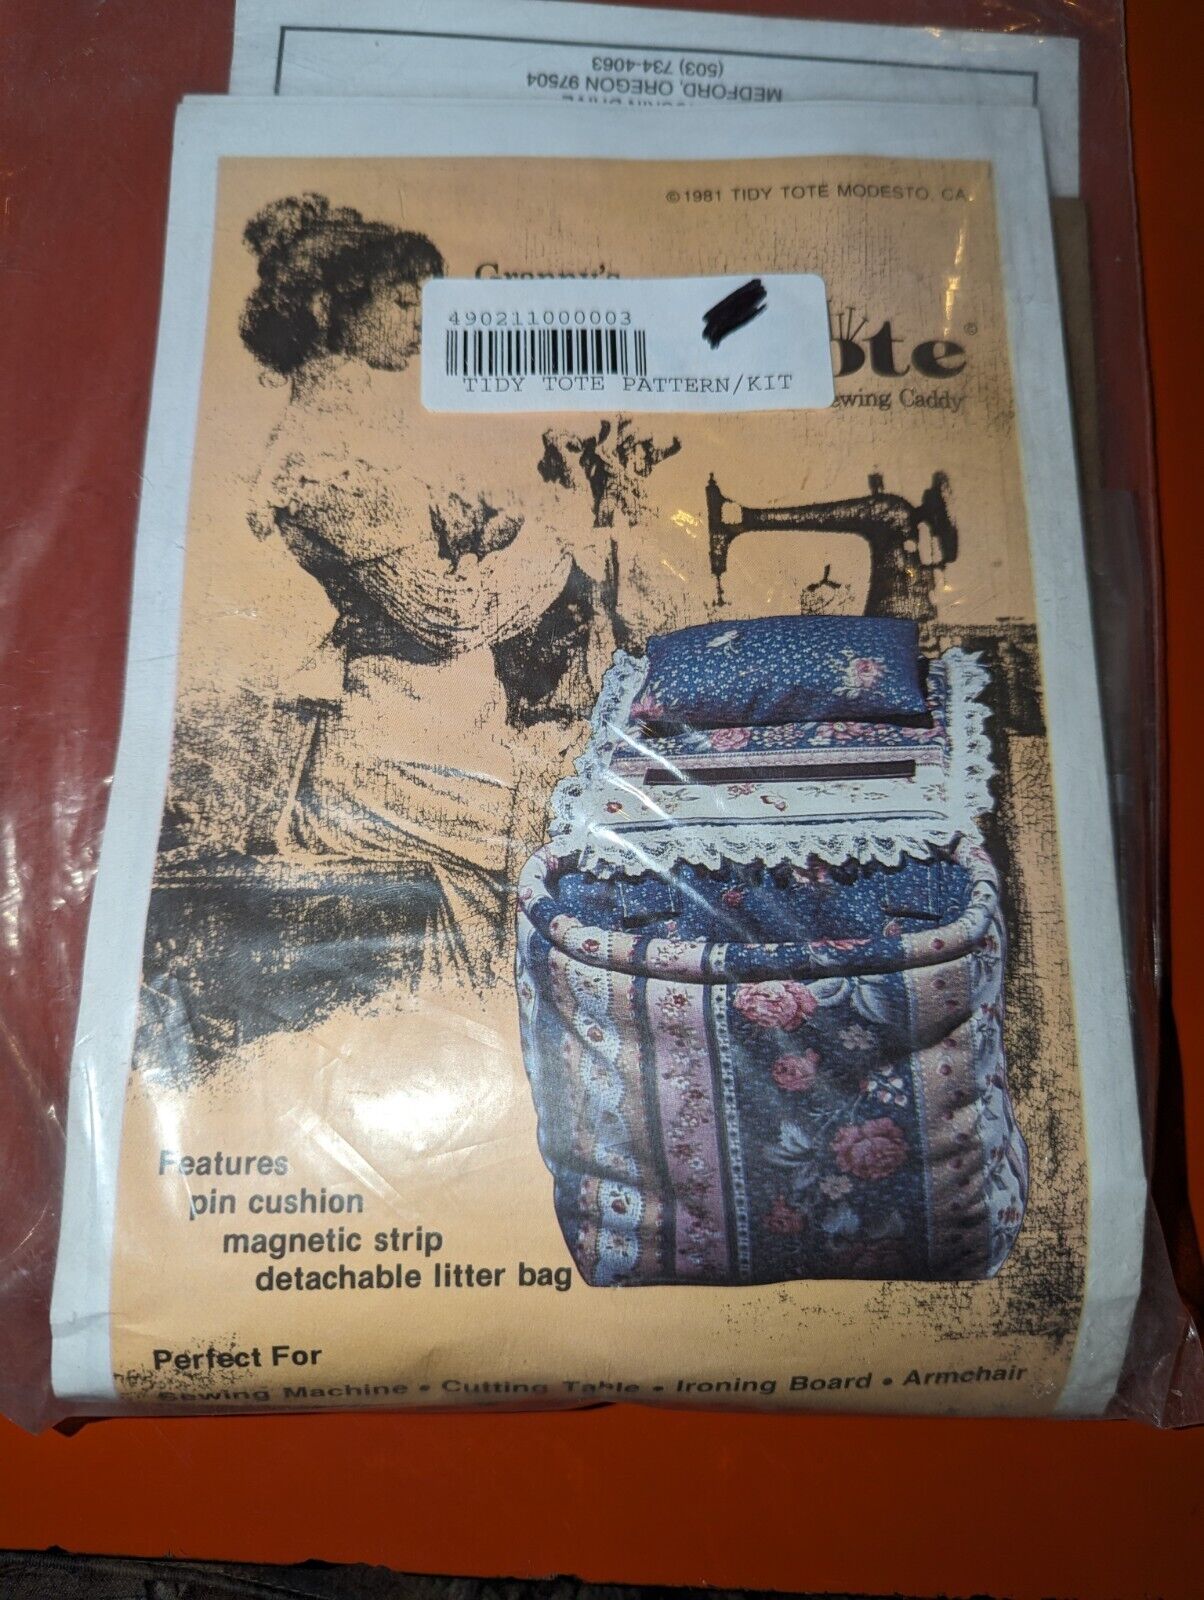 Vintage Granny\'s Tidy-Tote Craft and Sewing Caddy - 1981 - NIP